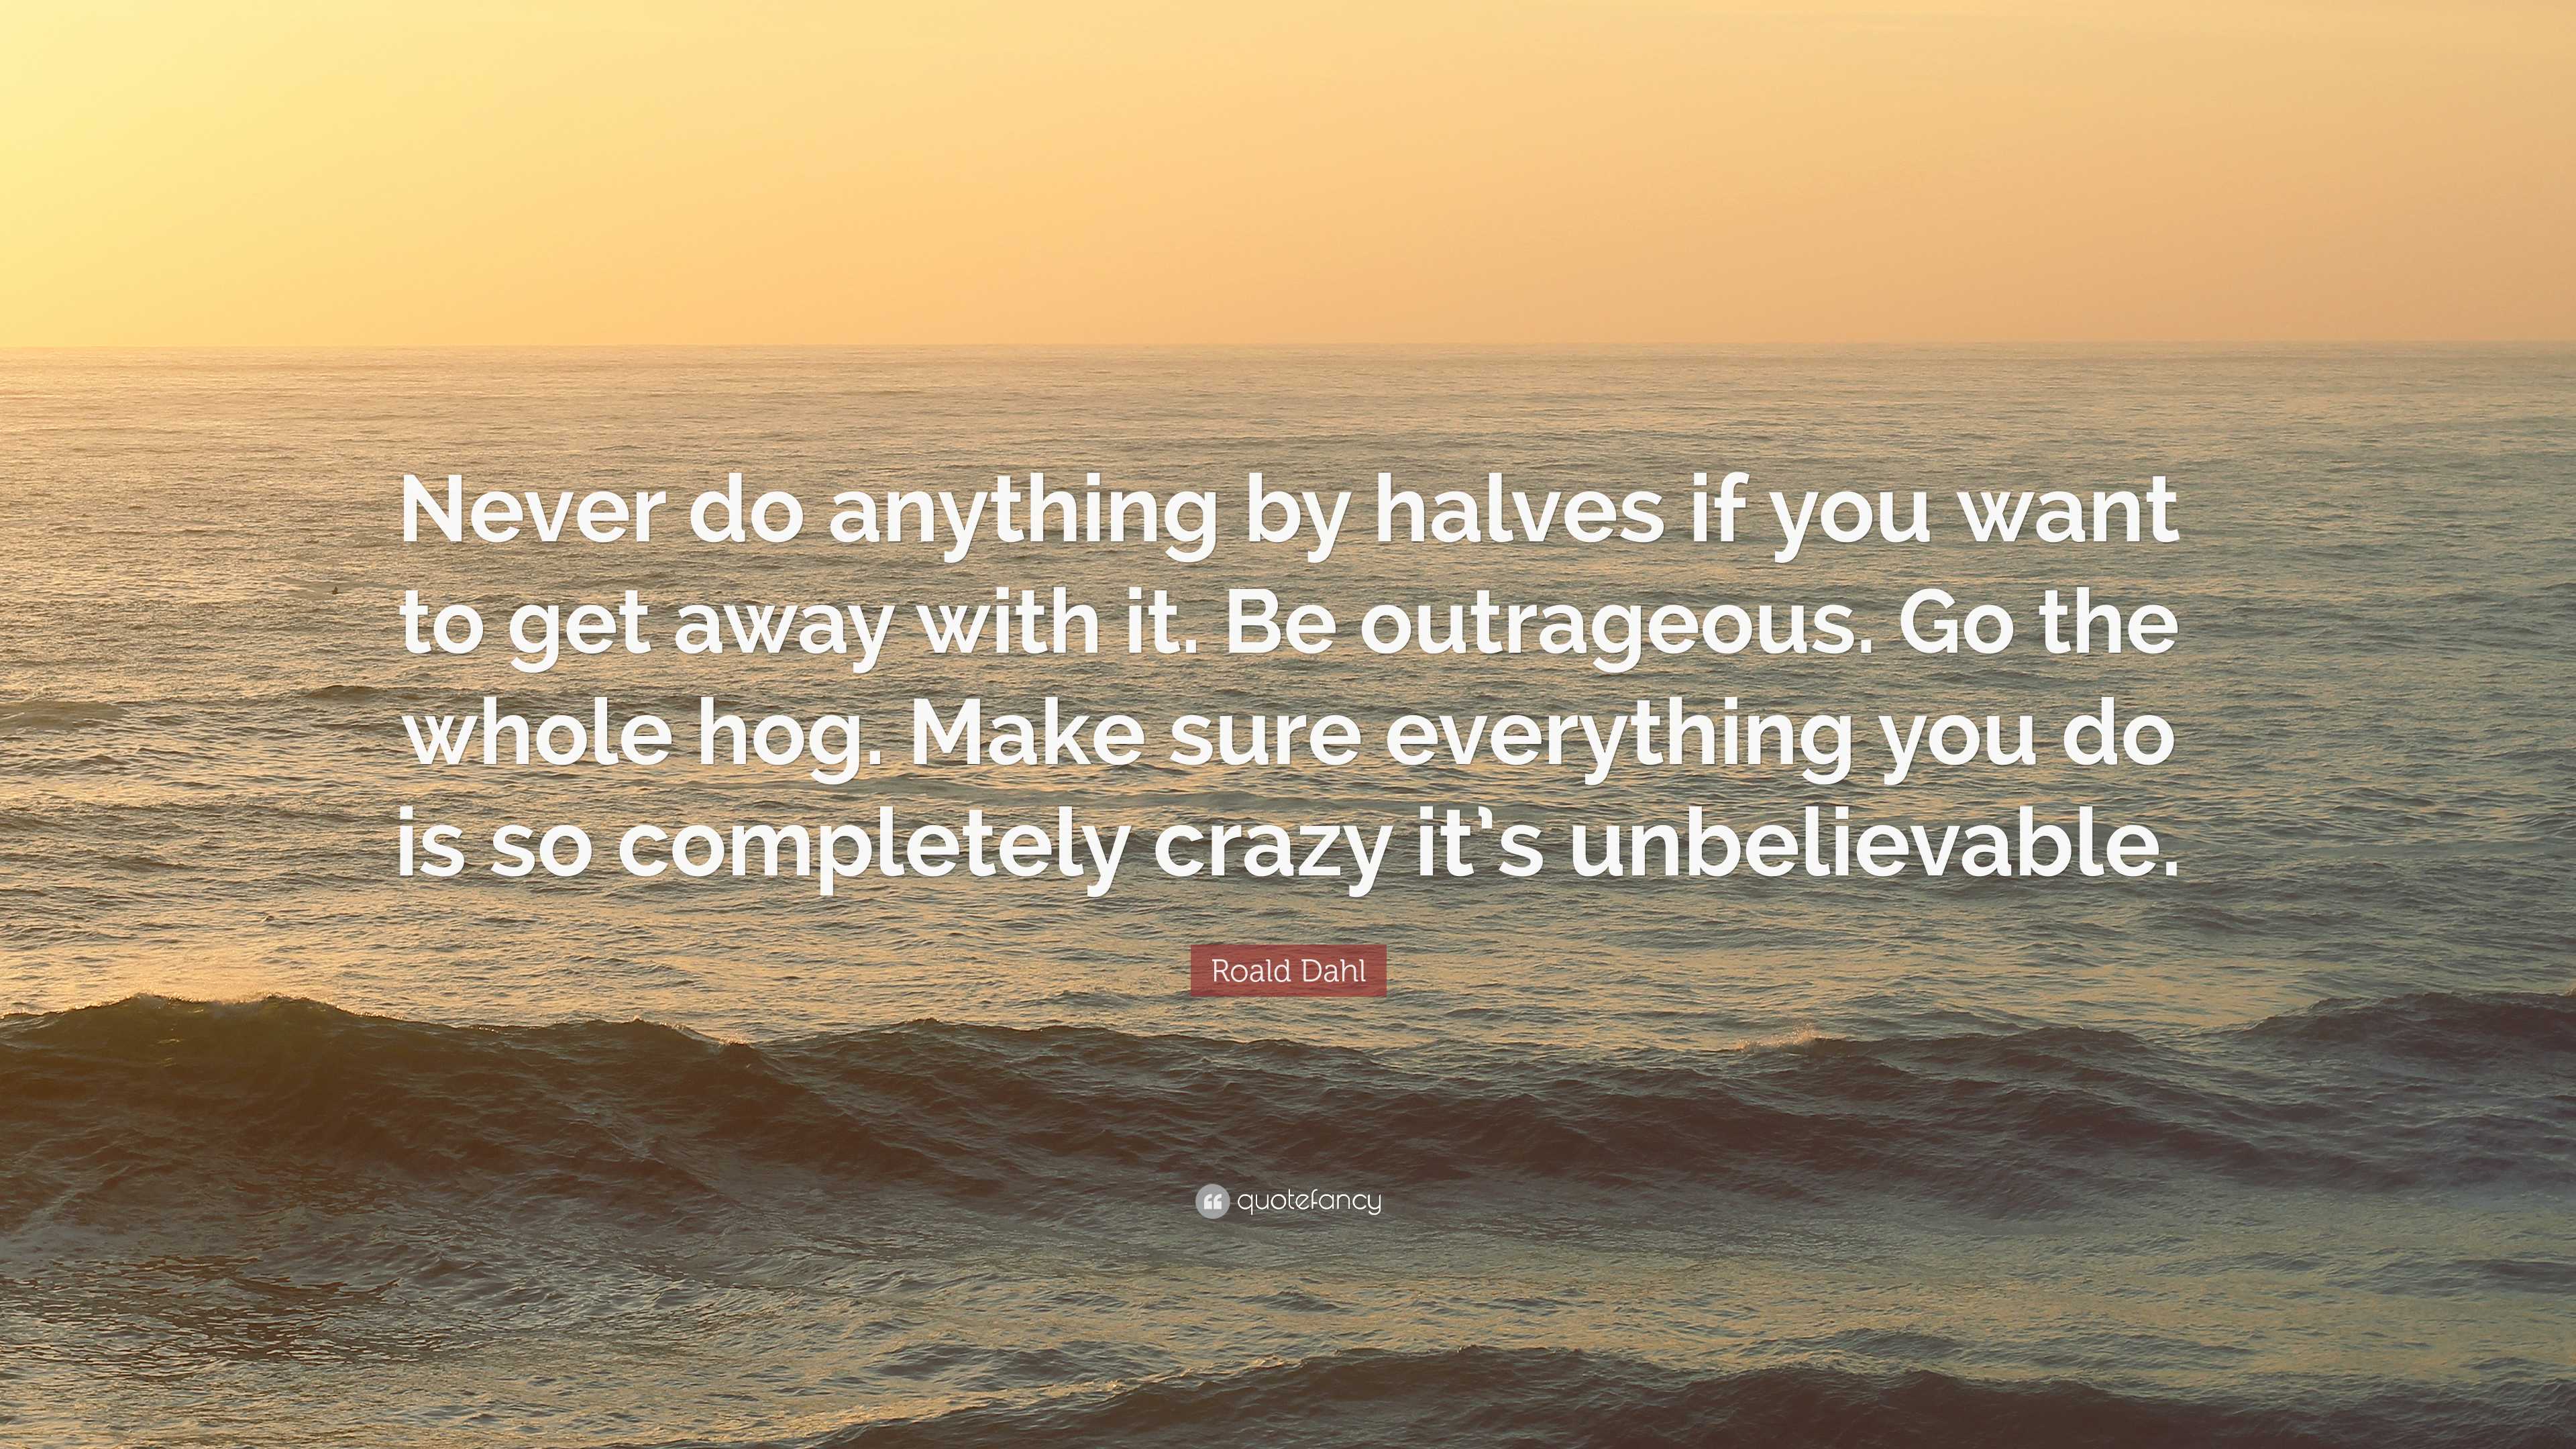 Roald Dahl Quote: “Never do anything by halves if you want to get away ...